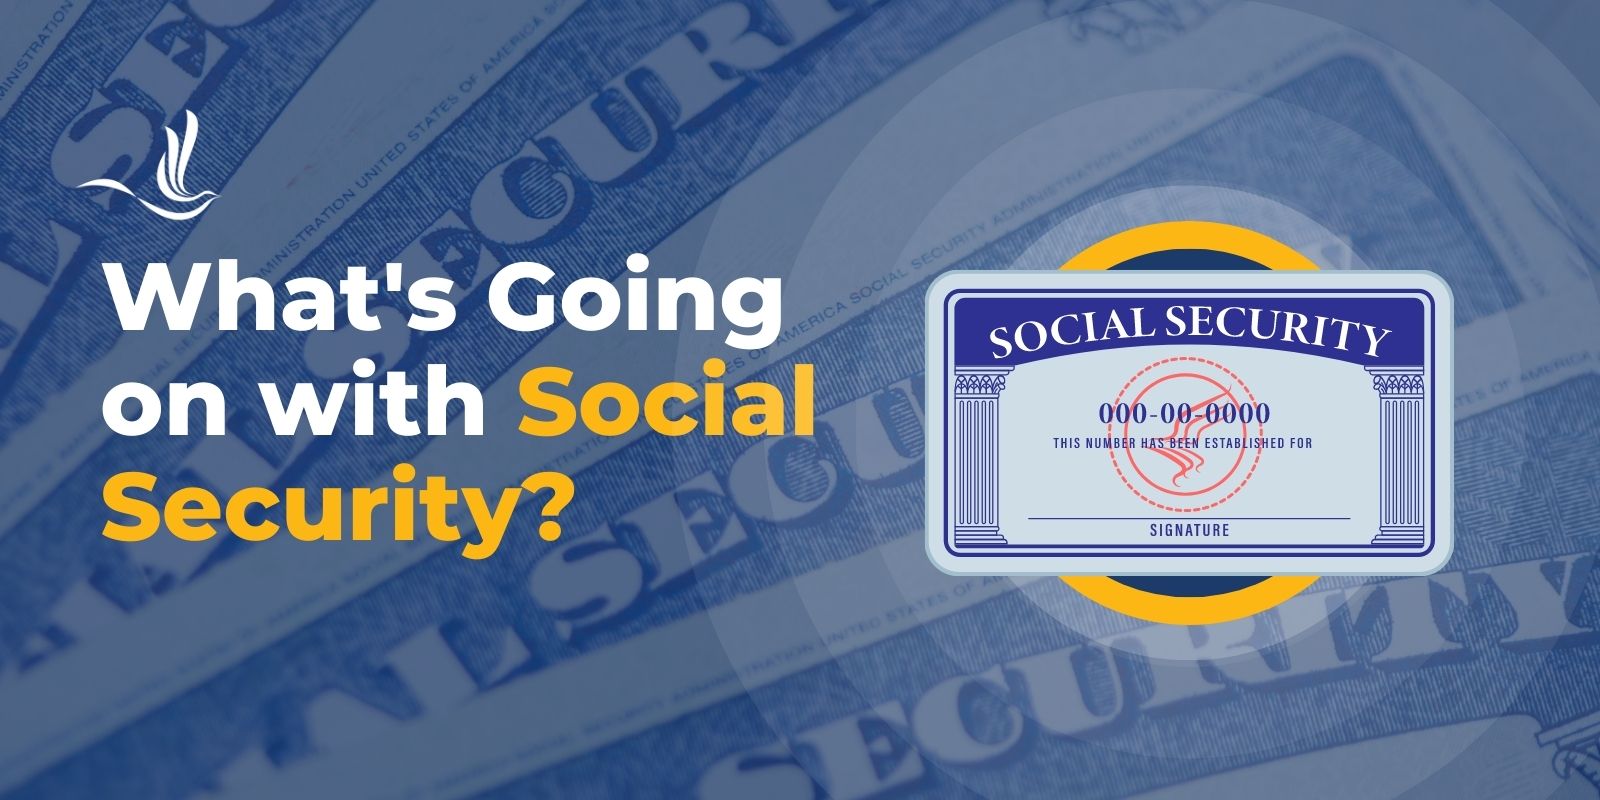 whats going on with social security